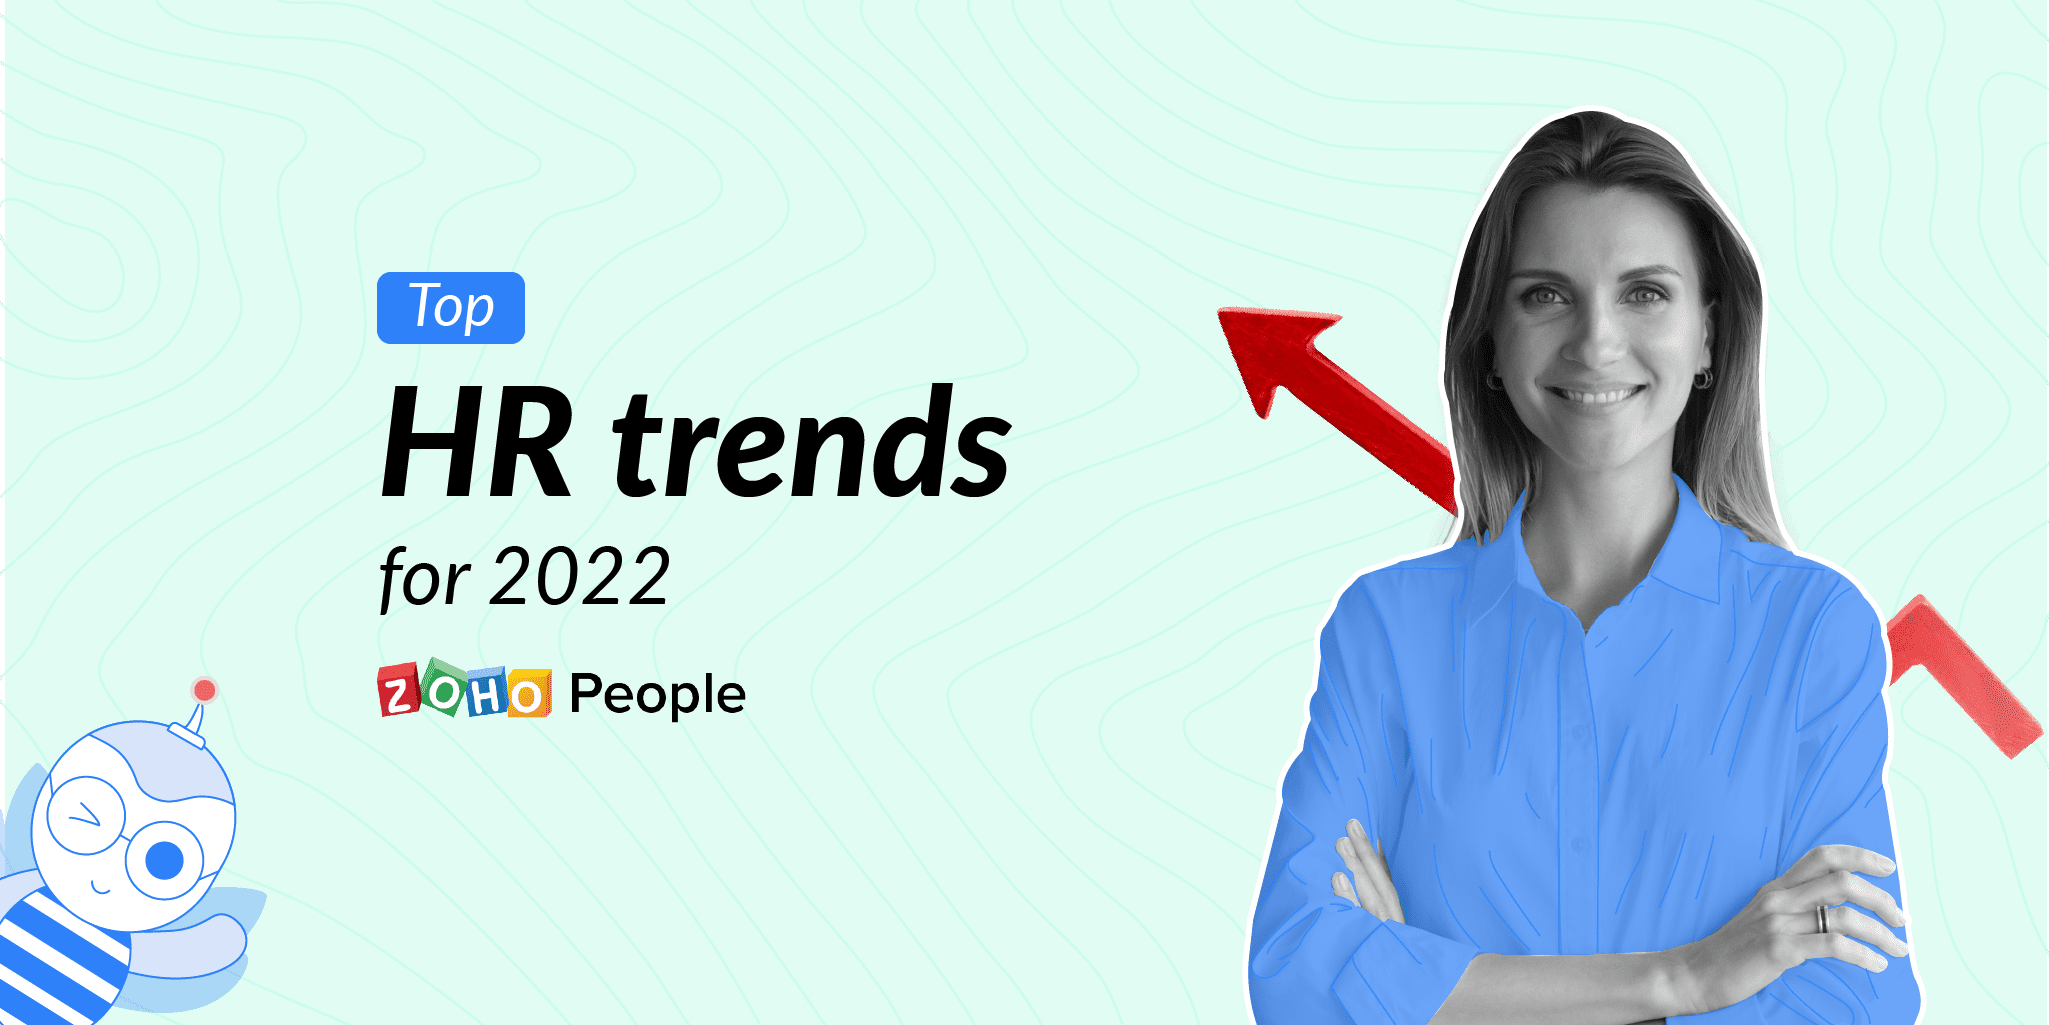 Top HR trends for 2022